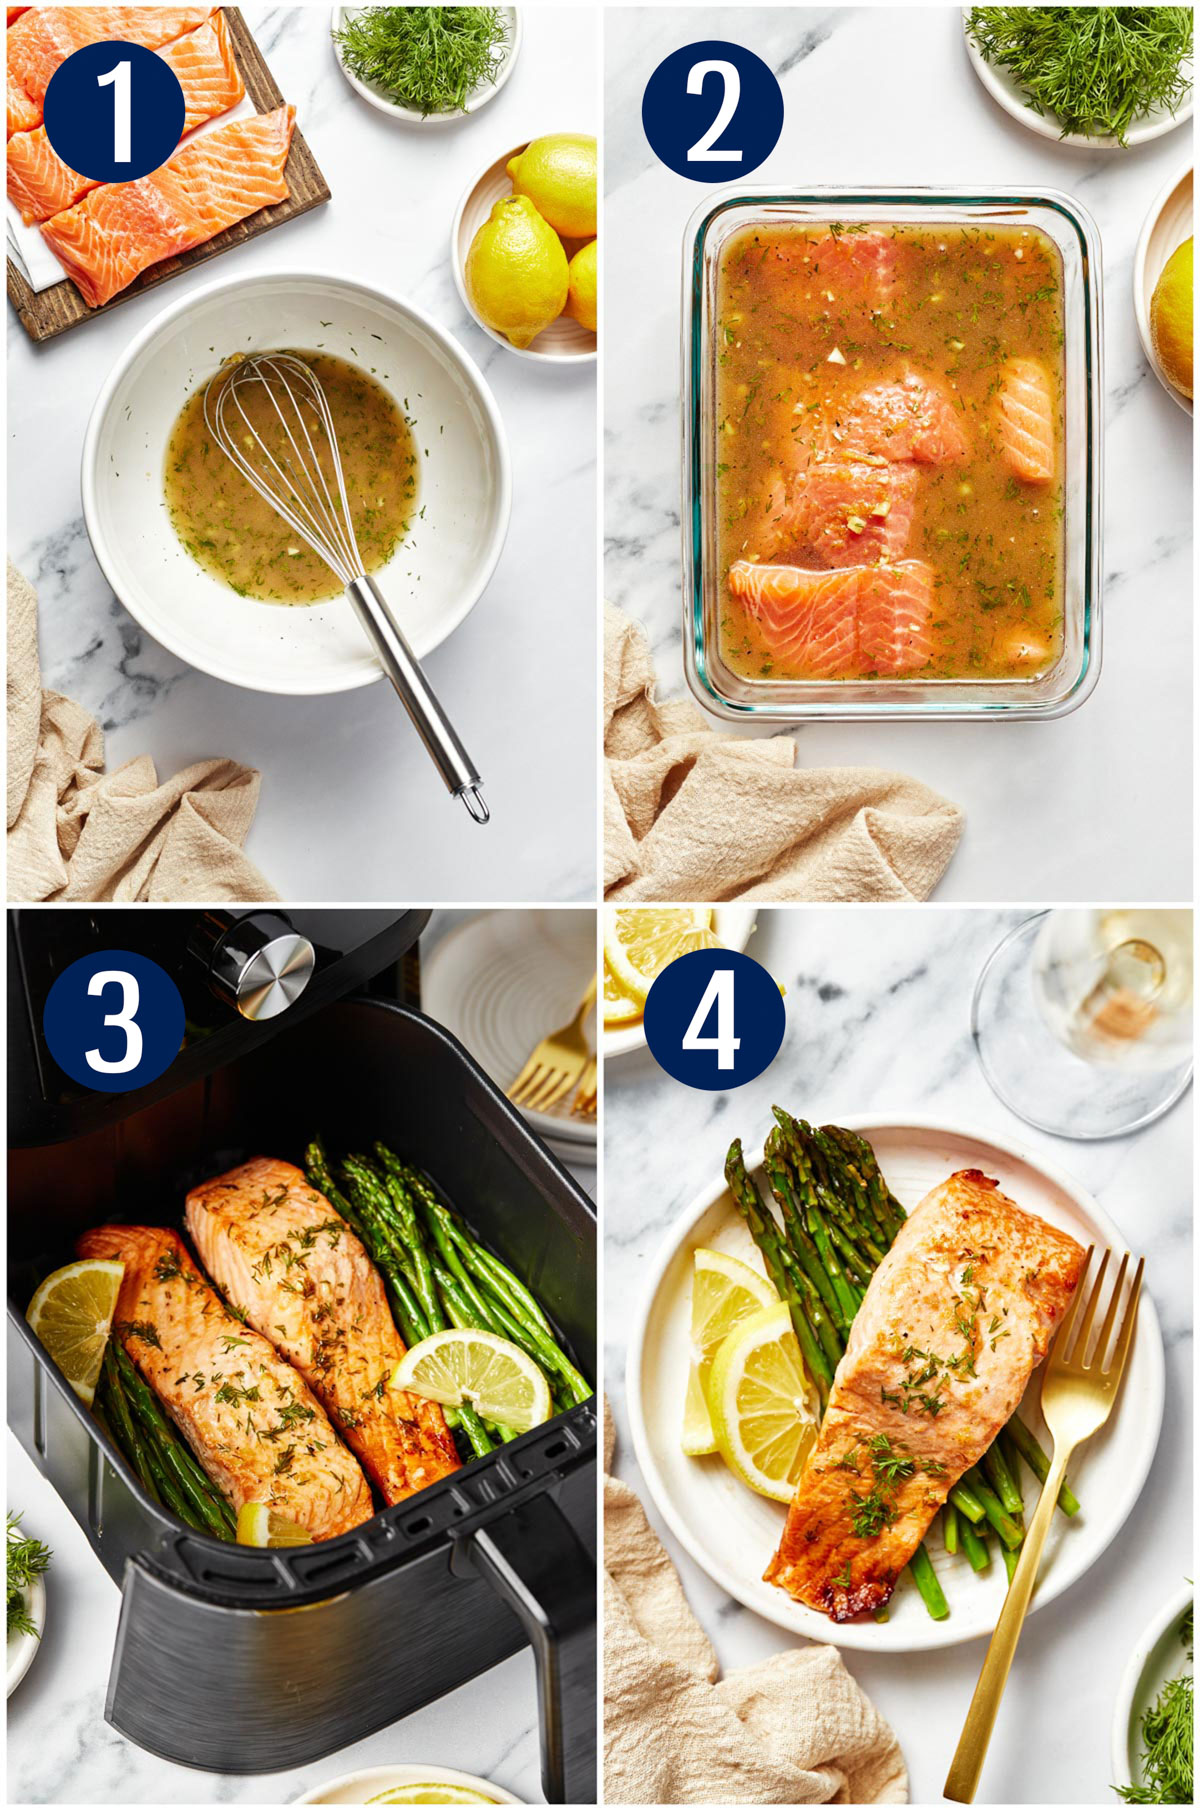 Step by step instructions collage for making air fryer salmon: mixing marinade, marinating salmon in a glass container, air frying salmon, serving with fresh lemon and dill.